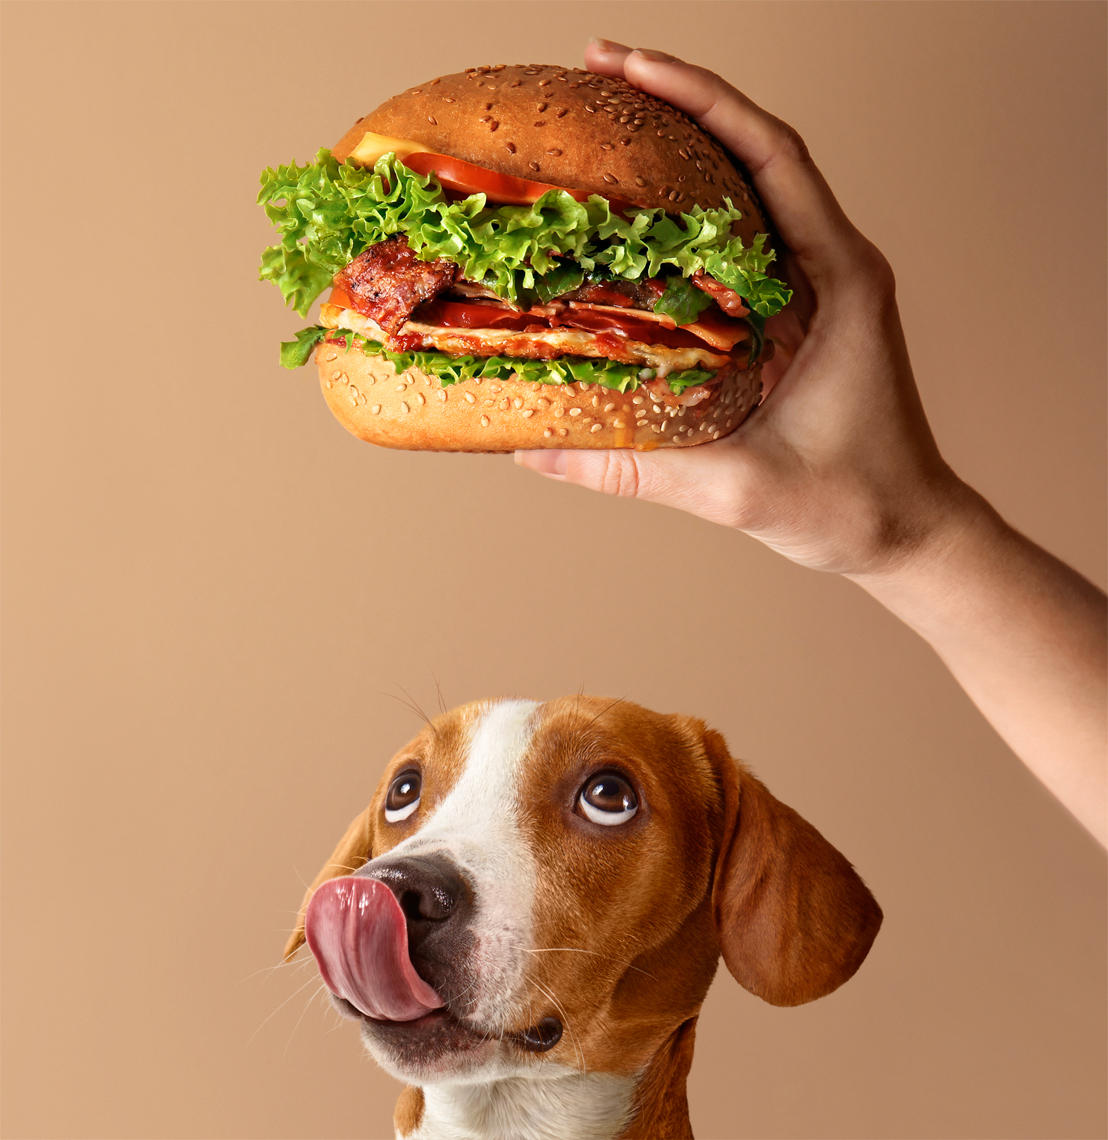 Dog licking lips looking up at burger held by female hand